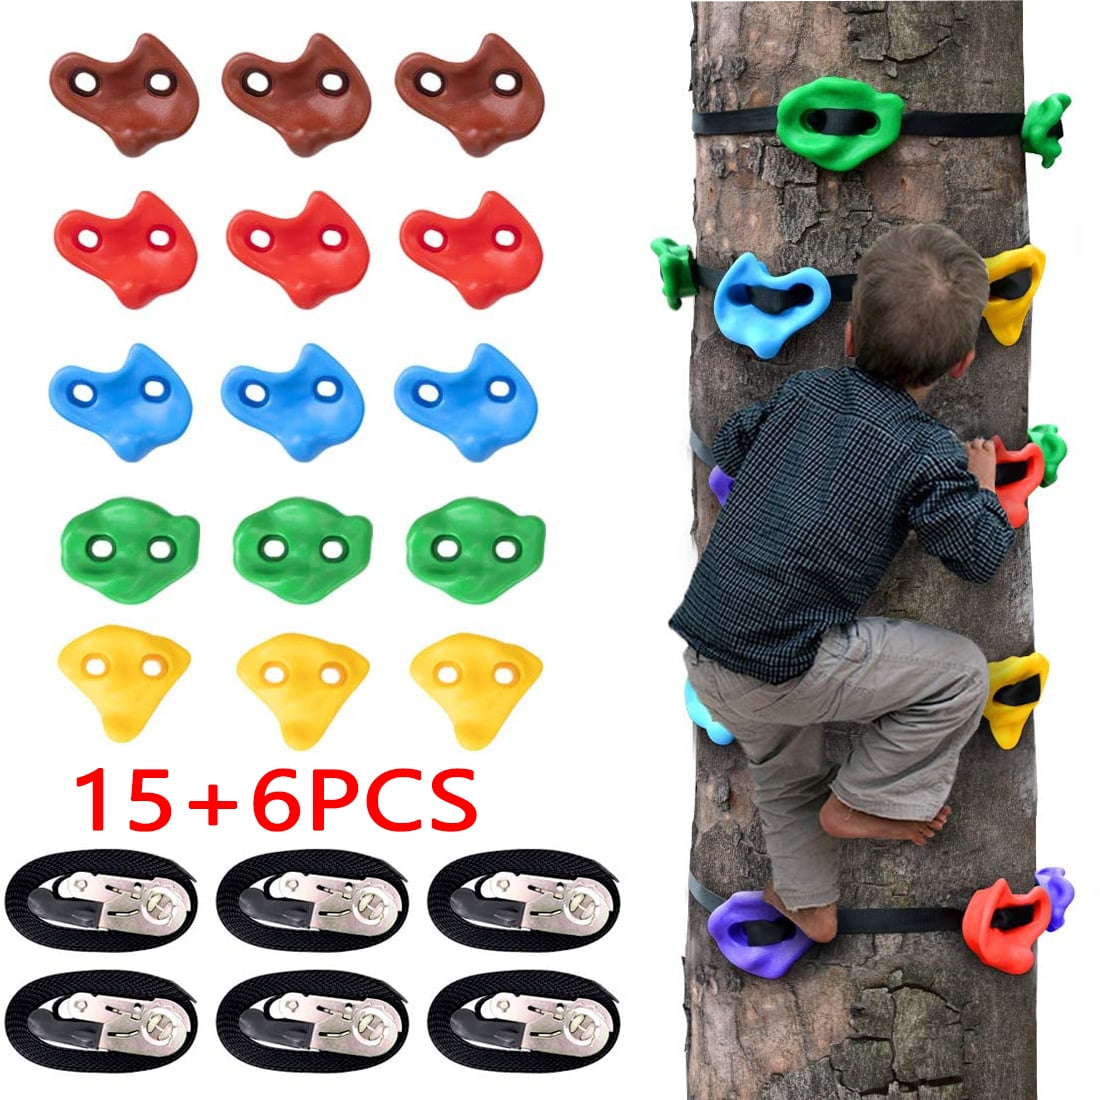 Outdoor Playground Dome Climber Resin Rock Climbing Hand Grips Weather Resistant 